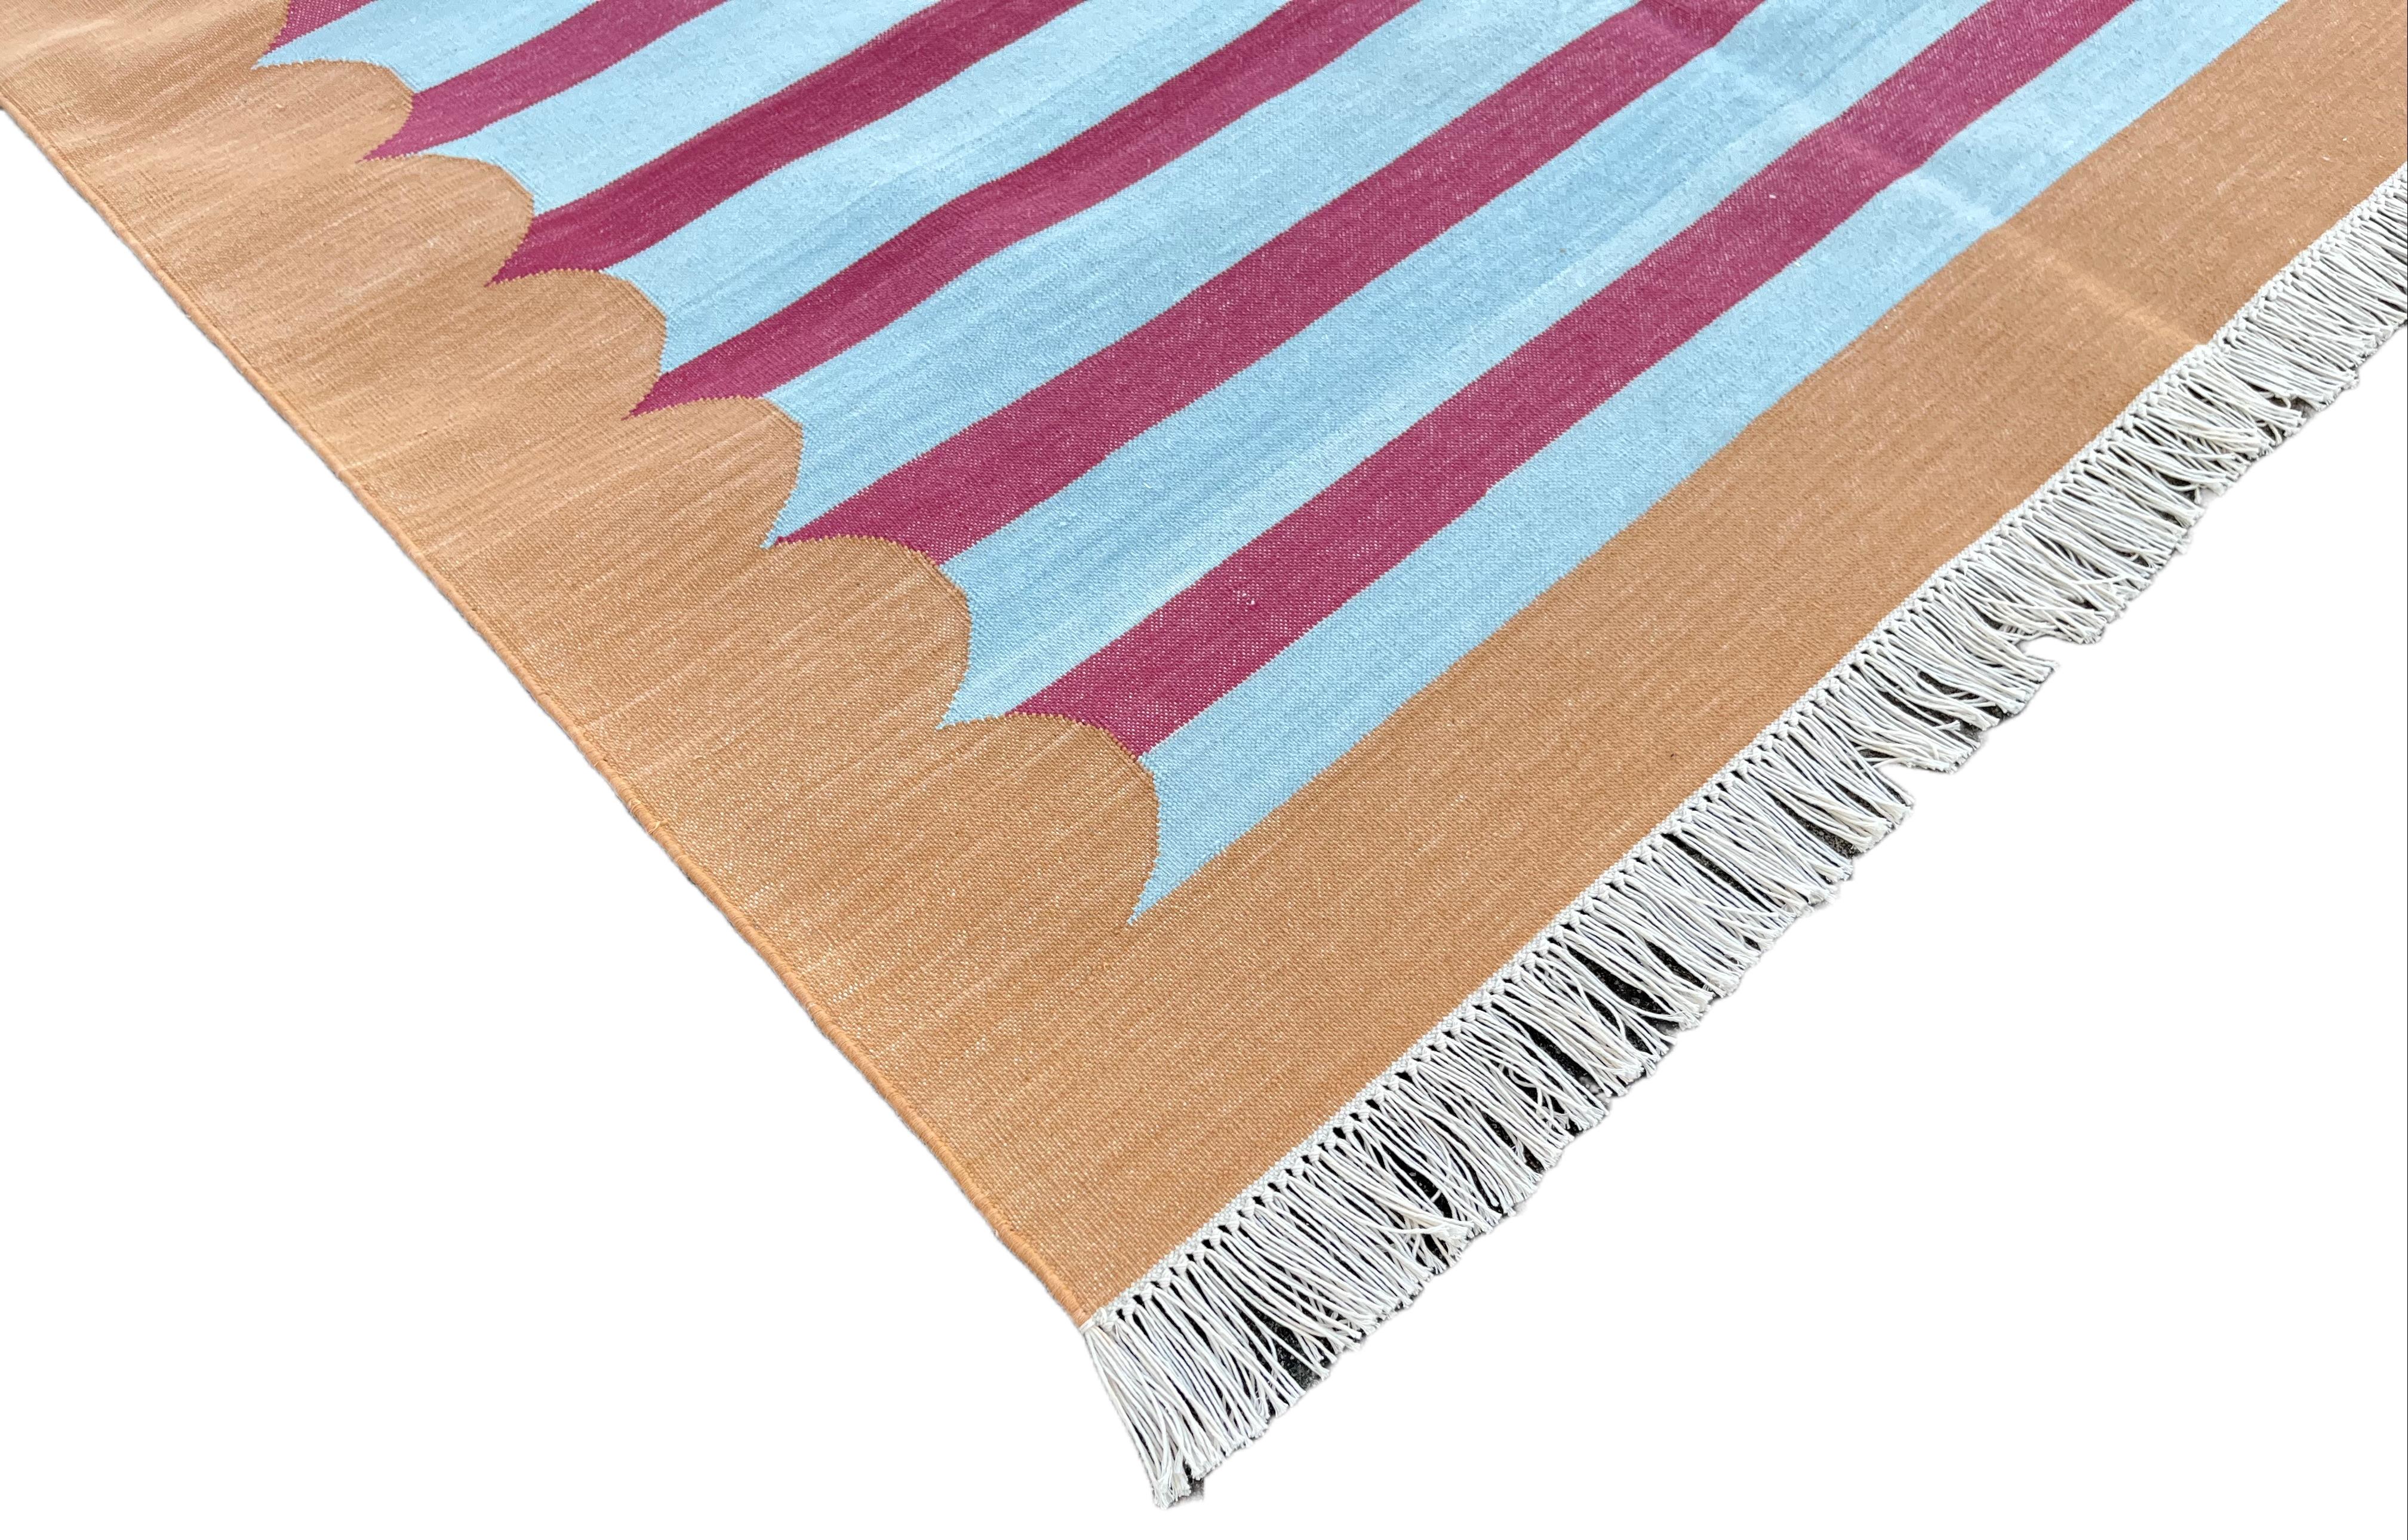 Handmade Cotton Area Flat Weave Rug, 8x10 Blue, Tan, Pink Striped Indian Dhurrie For Sale 1